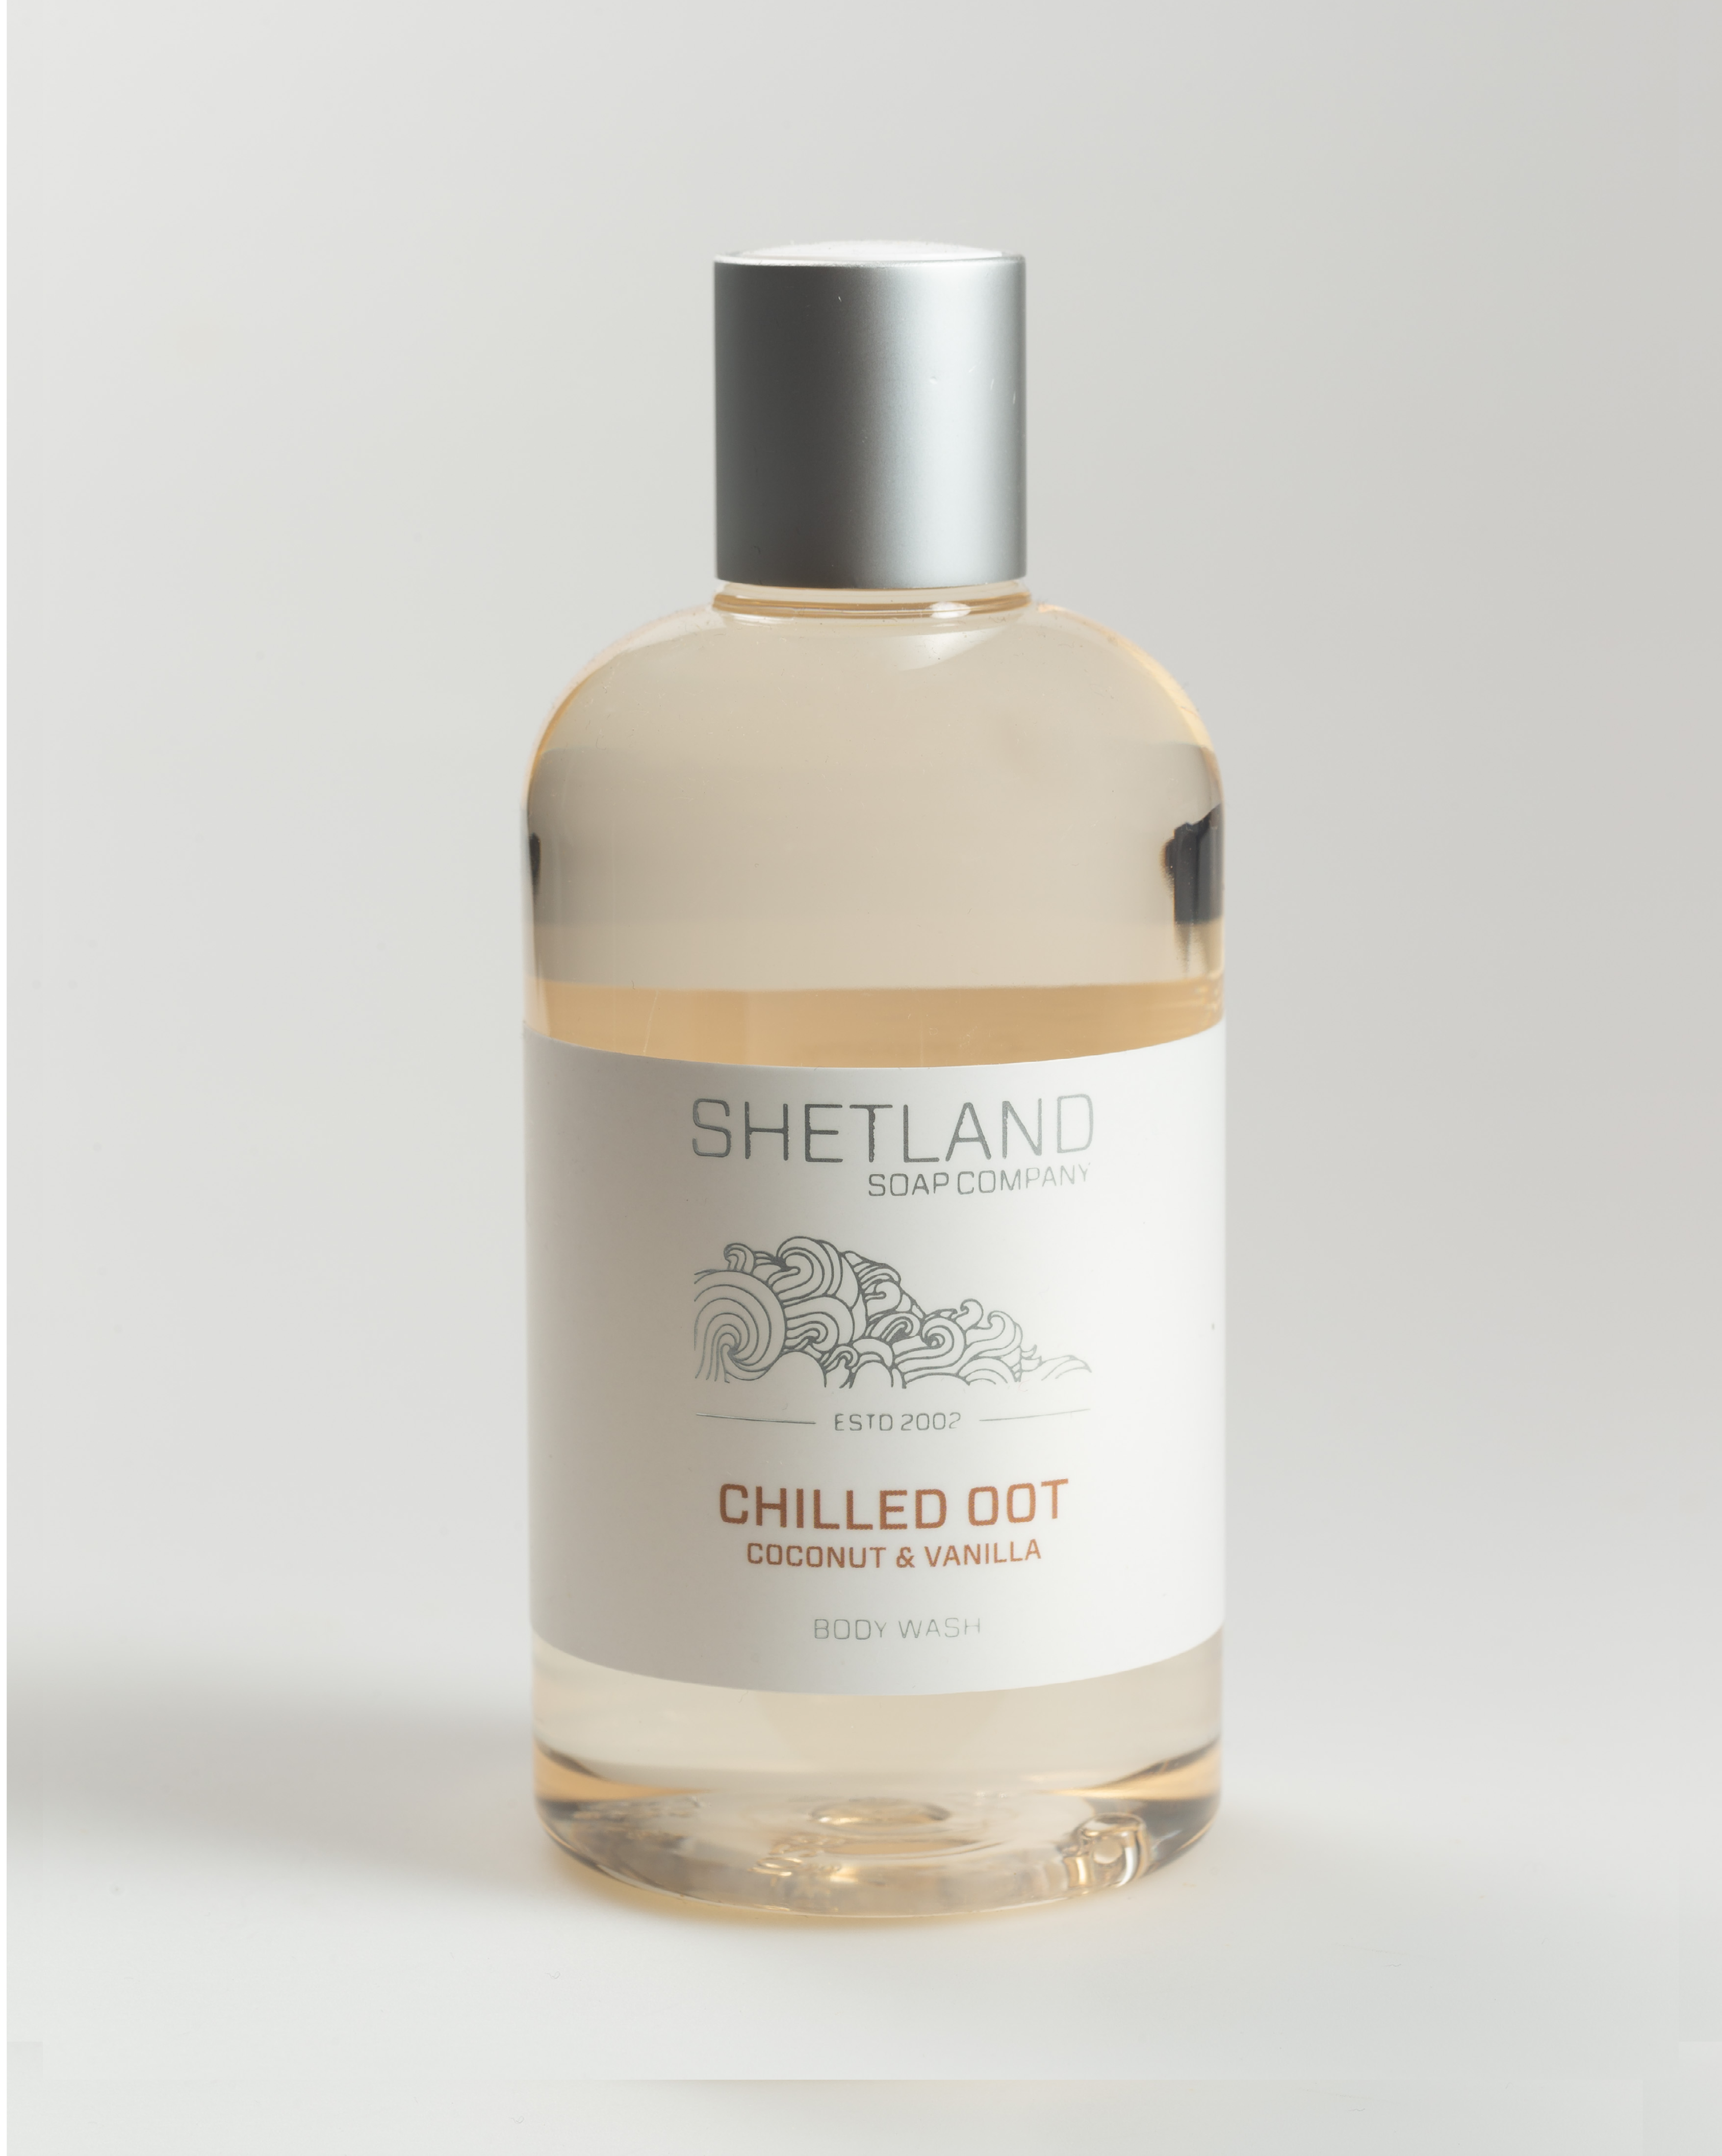 CHILLED OOT BODY WASH